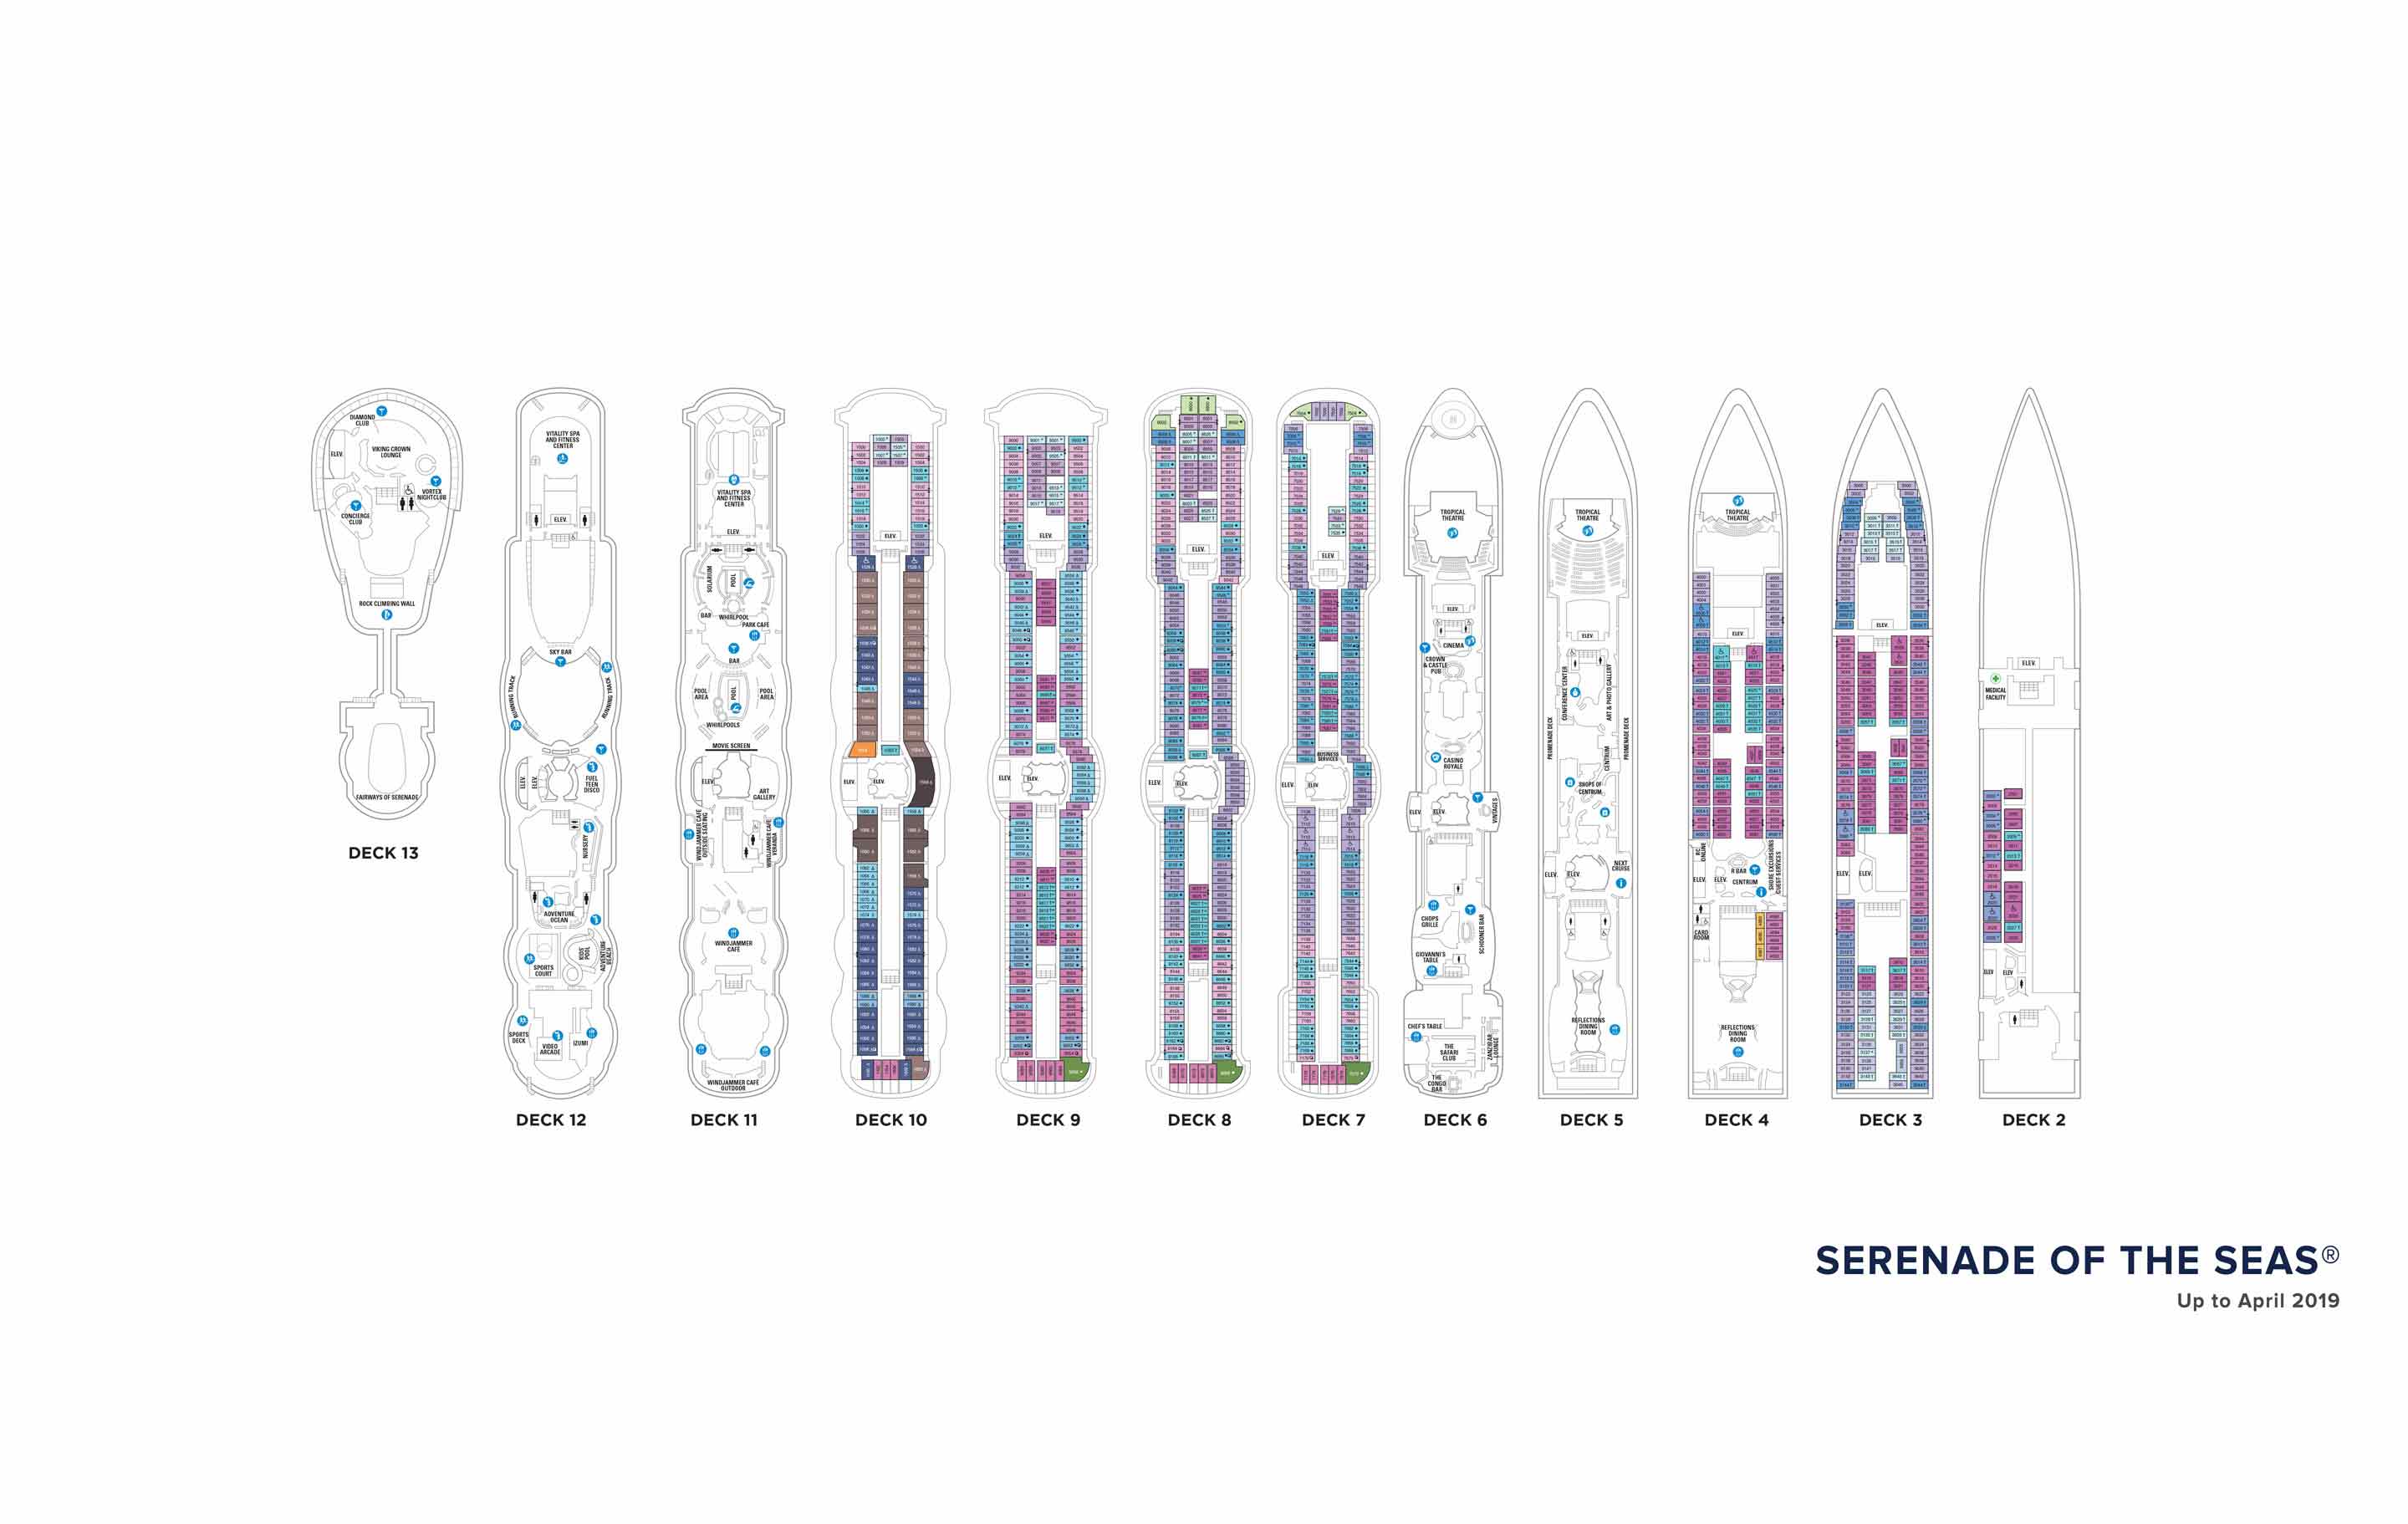 The deck plans for Serenade of the Seas, Royal Caribbean Cruises